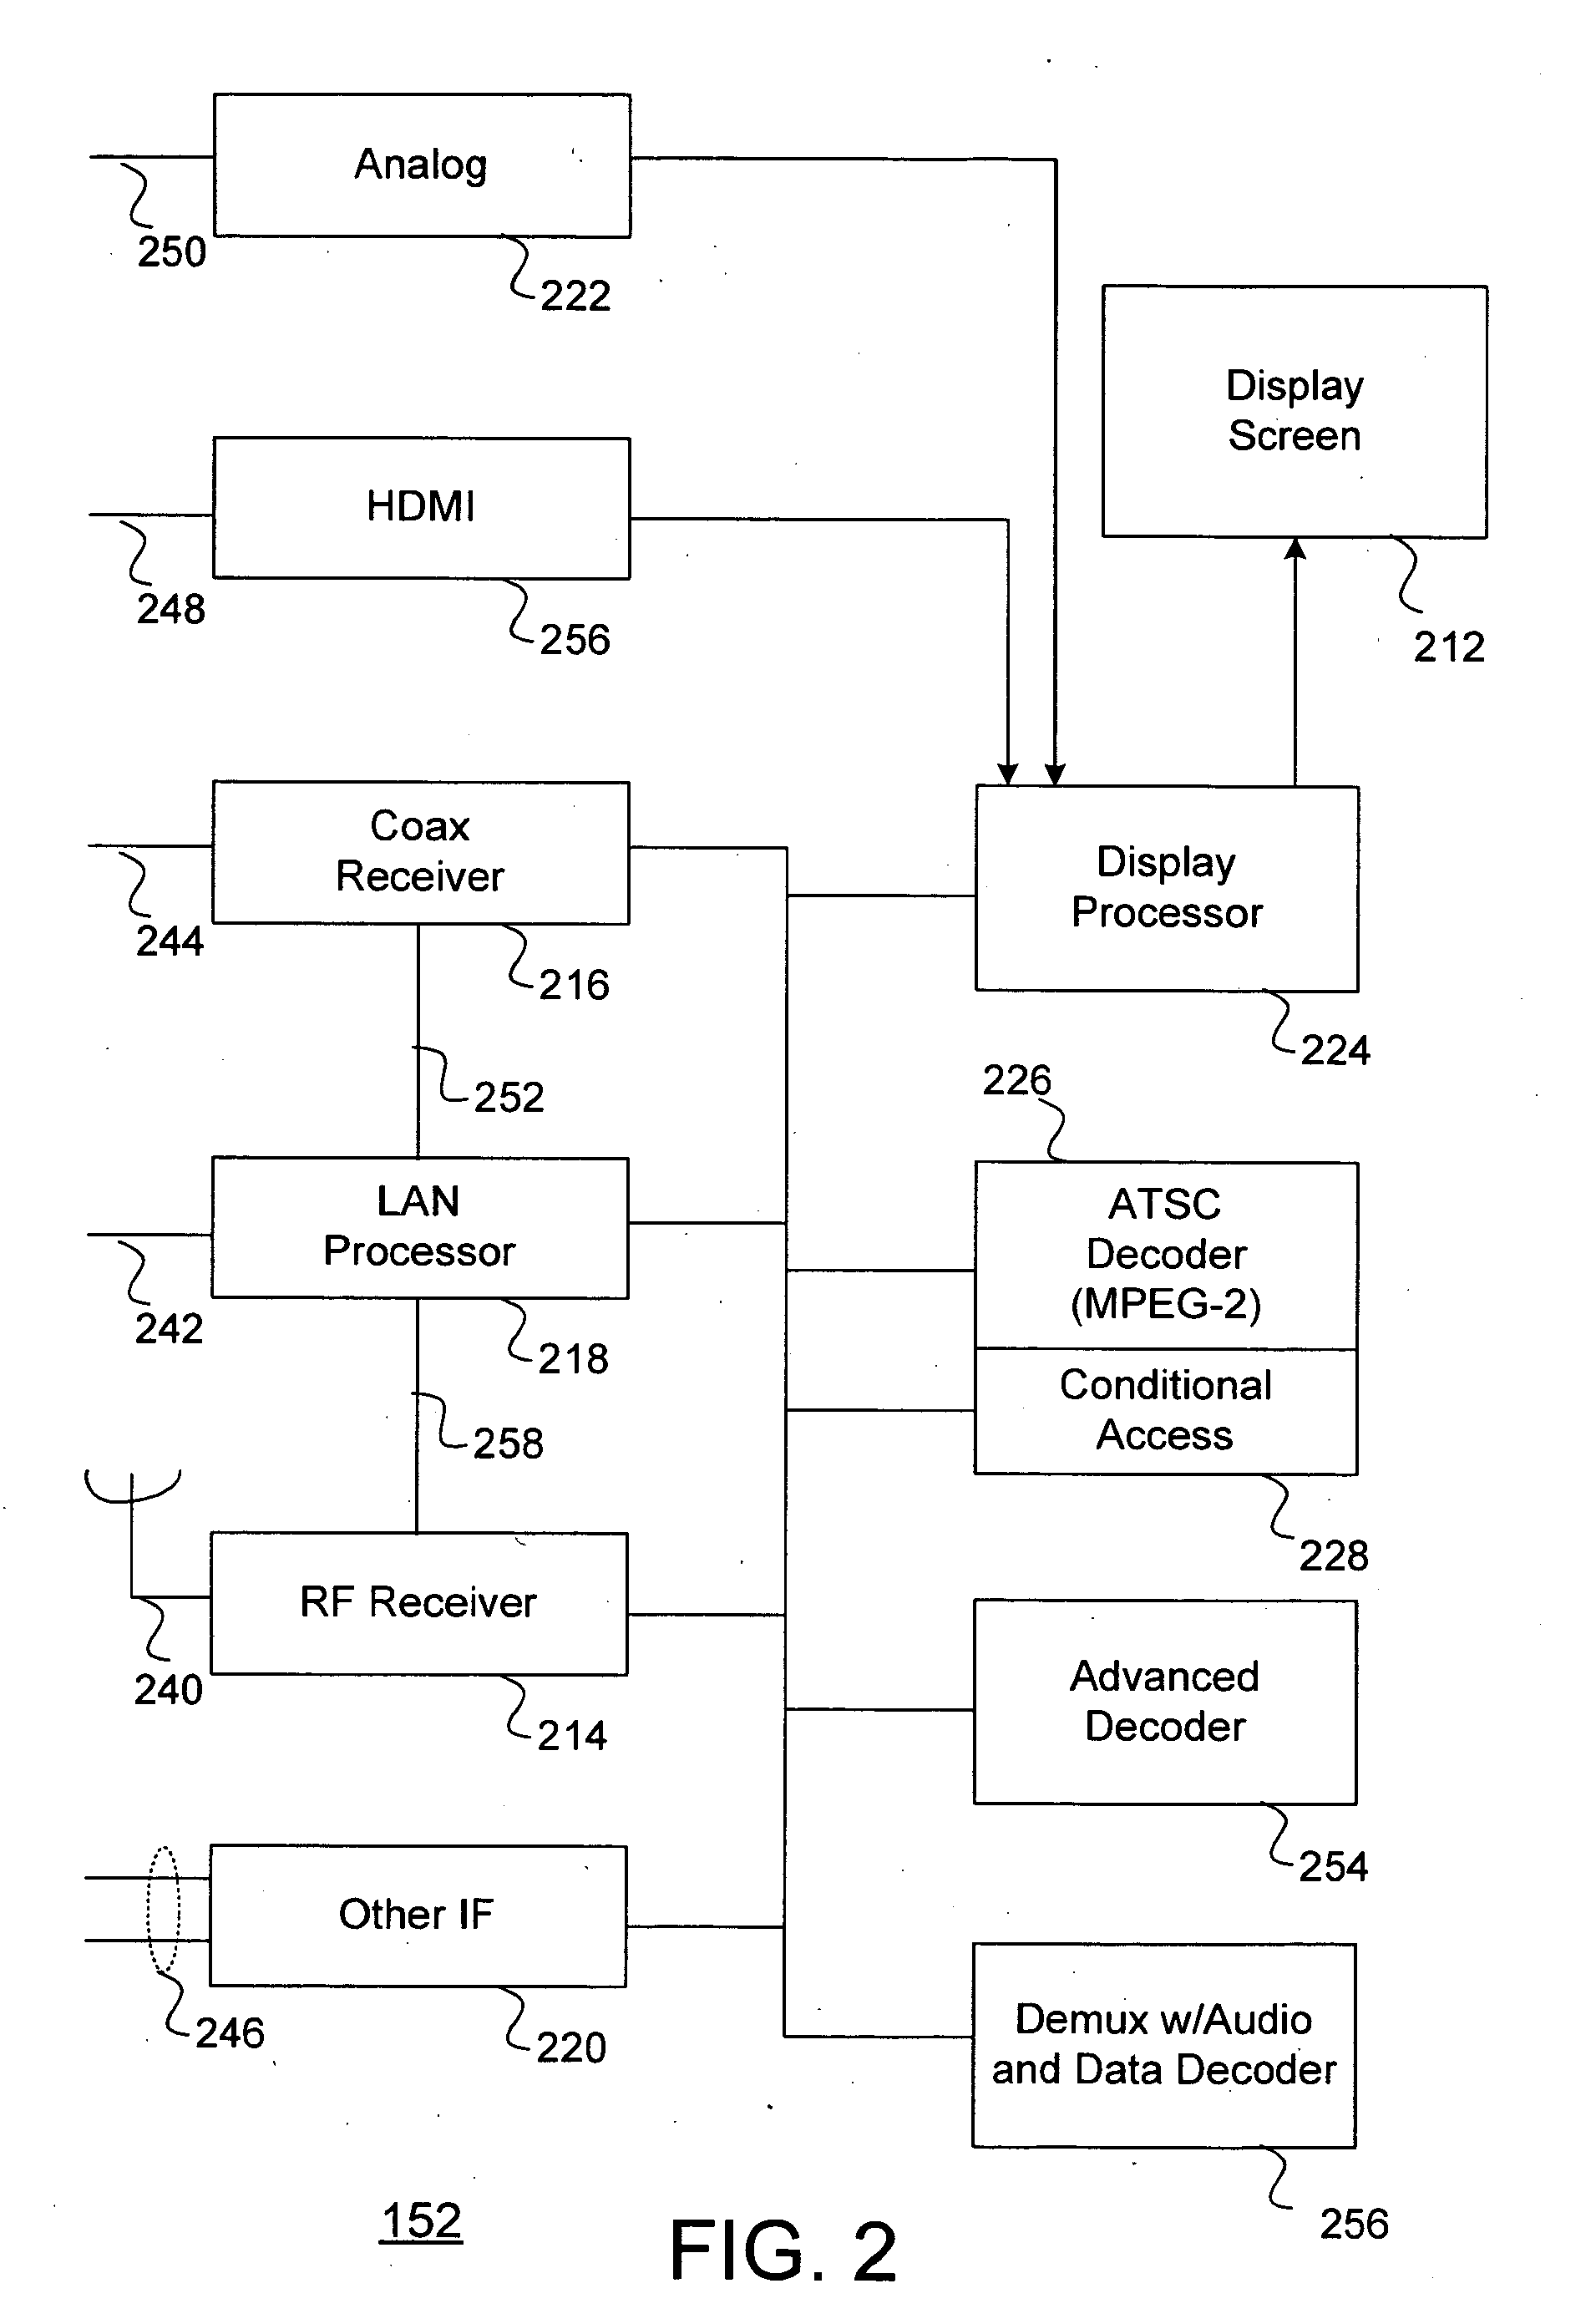 Method for effectively implementing a multi-room television system